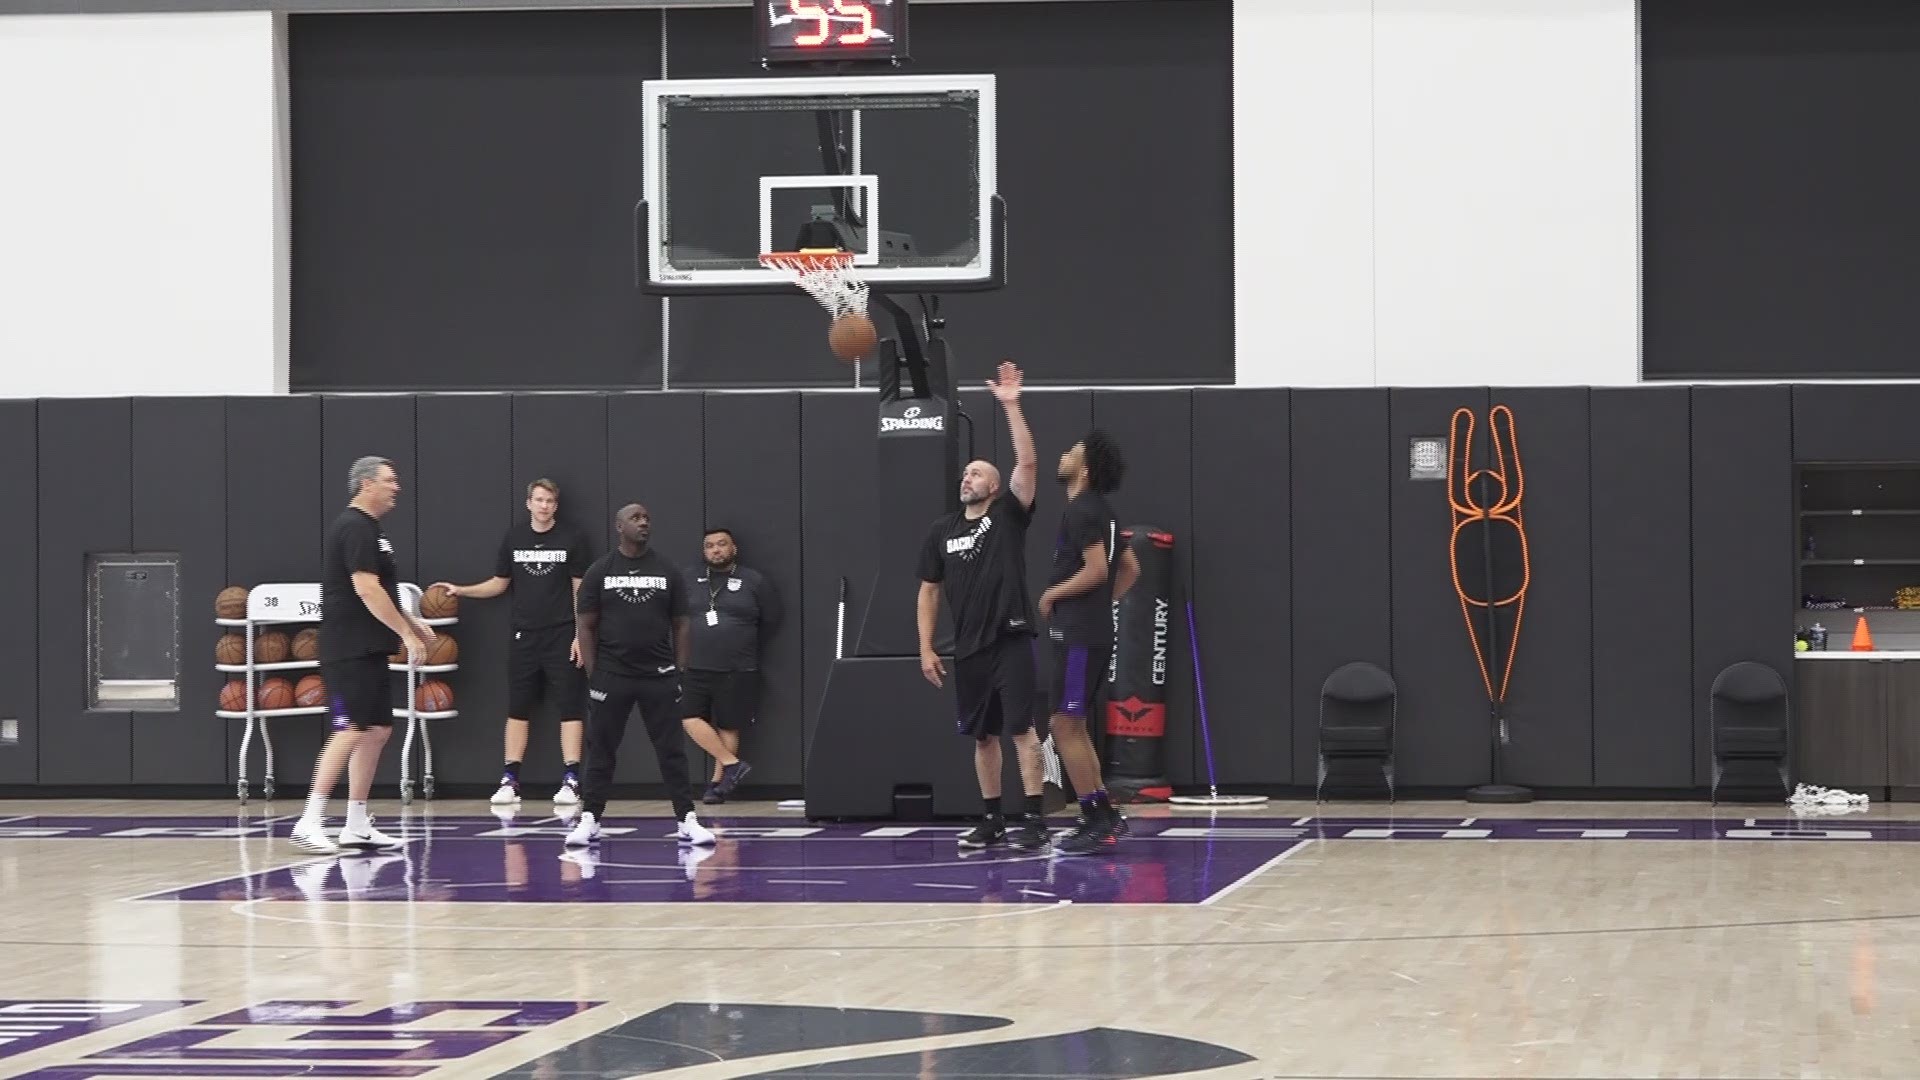 With just 10 days left until the NBA Draft the Kings bring in one of the top NBA Draft prospects, Marvin Bagley III, for an individual pre-draft work out.